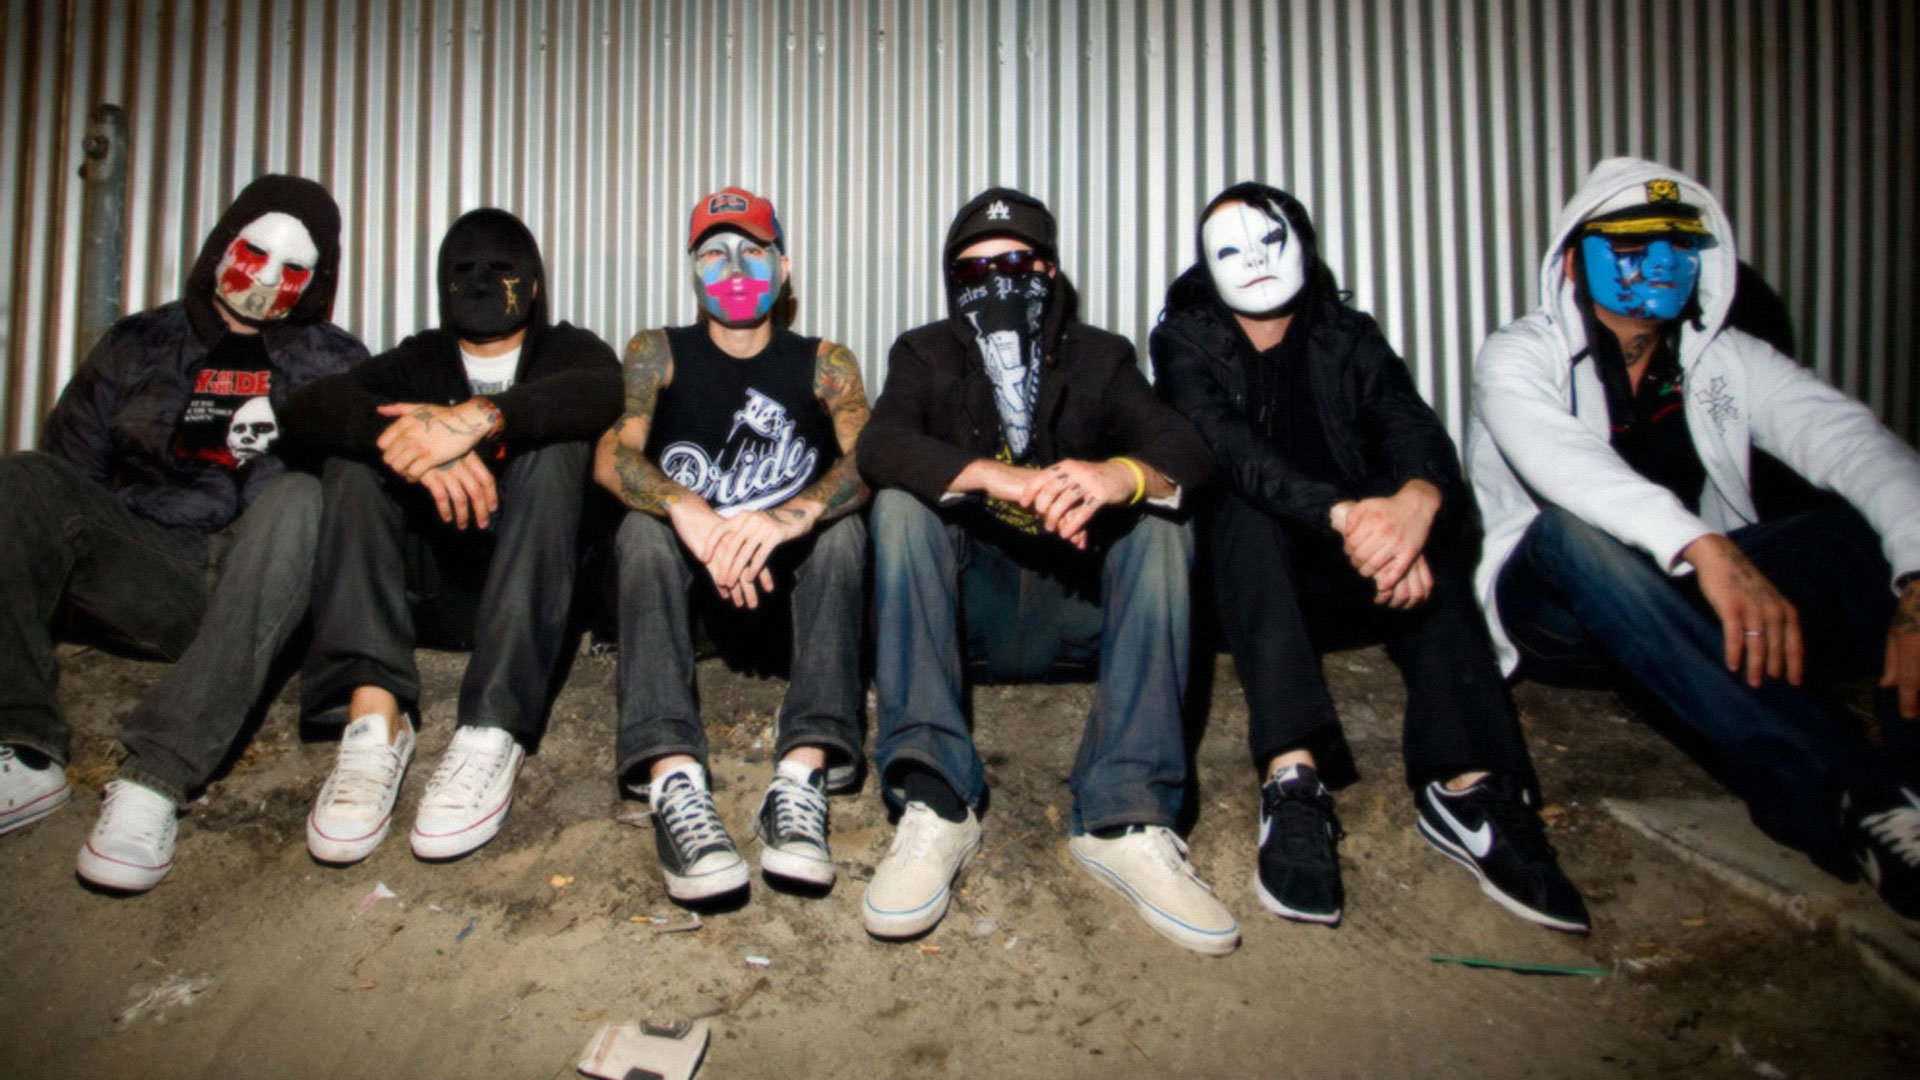 Free Download Hollywood Undead Wallpaper Id - Hollywood Undead 2011 - HD Wallpaper 